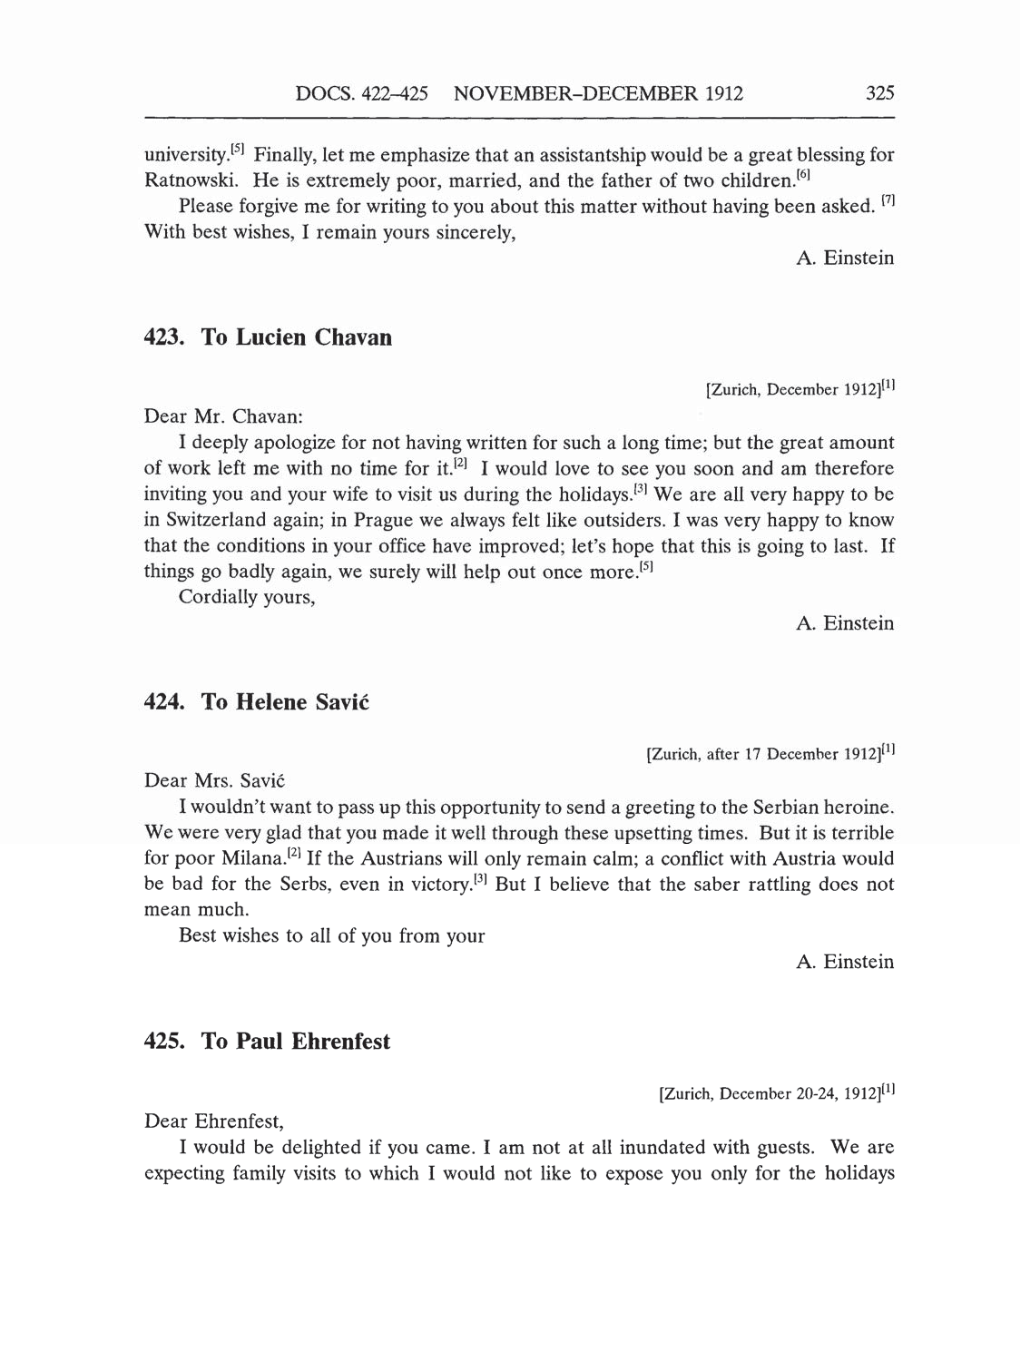 Volume 5: The Swiss Years: Correspondence, 1902-1914 (English translation supplement) page 325